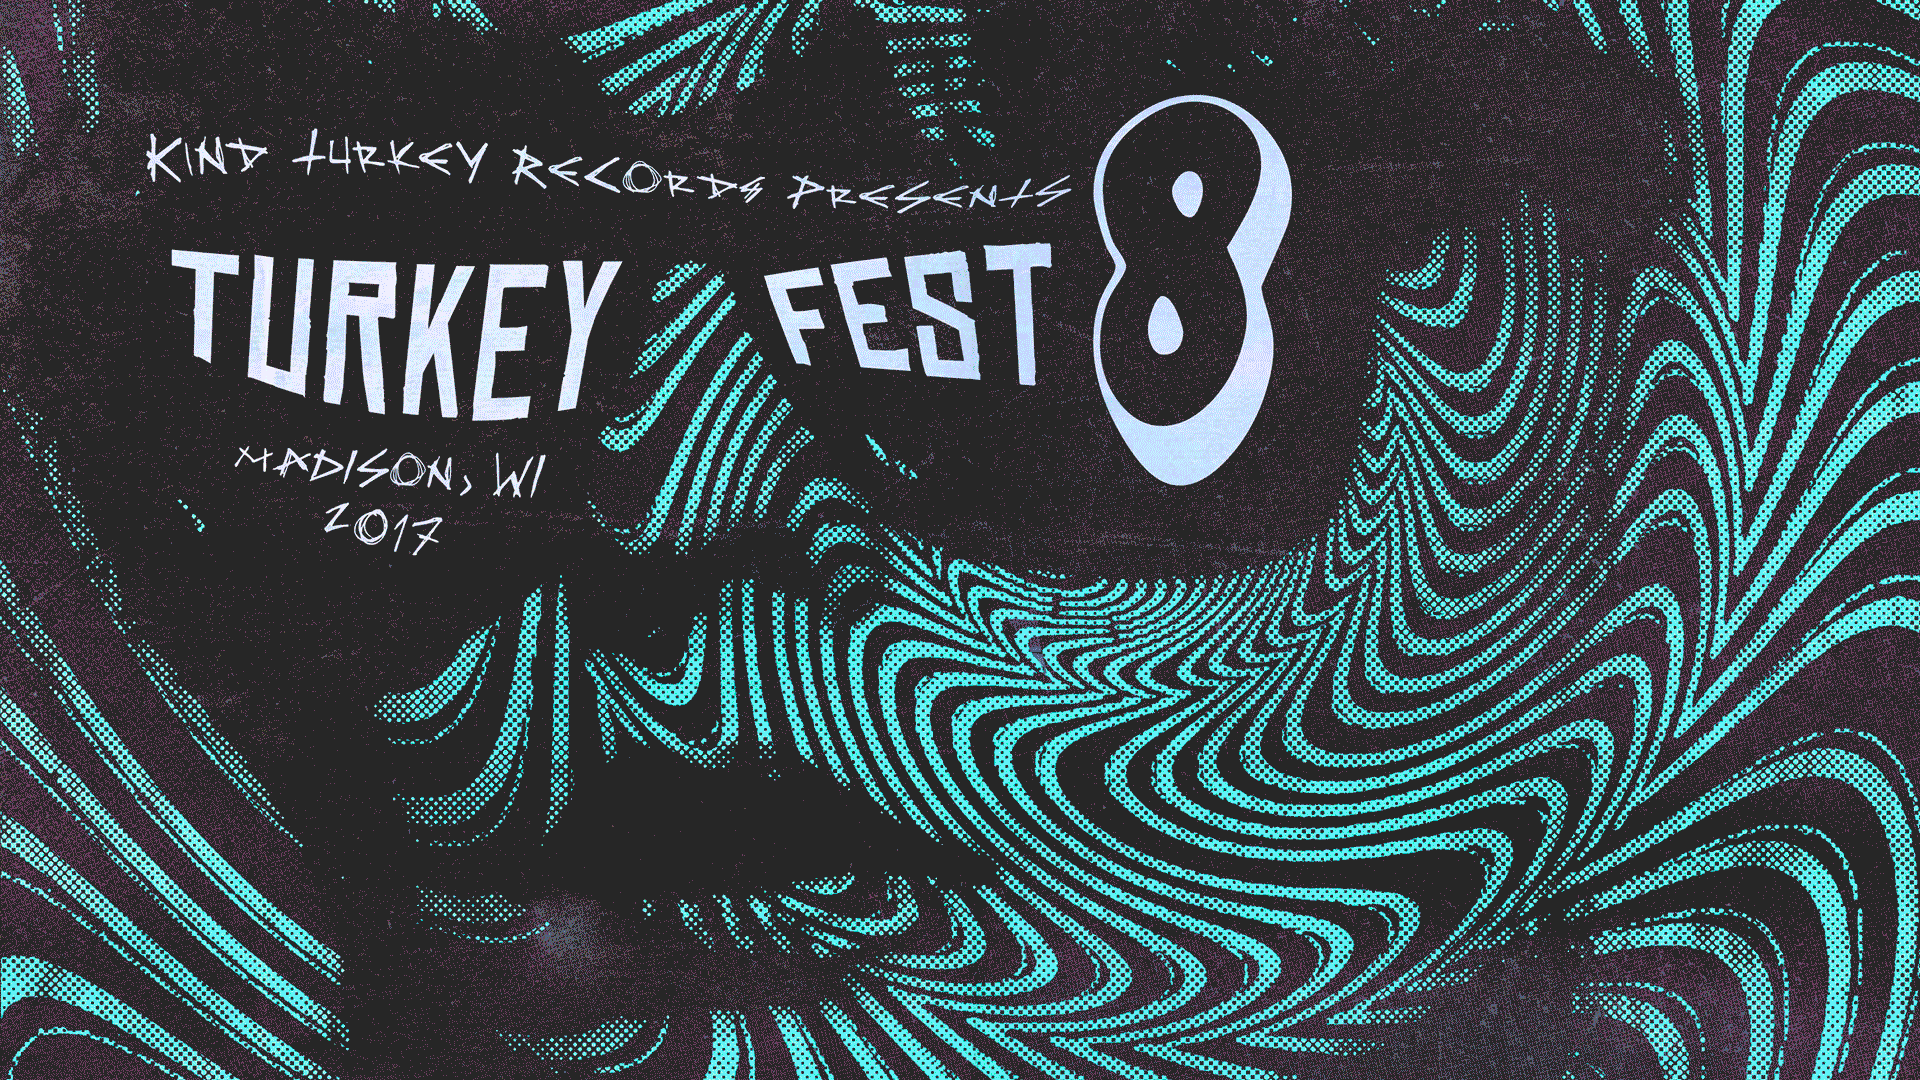 turkey fest 8 poster design and tripped out gif for kind turkey medium